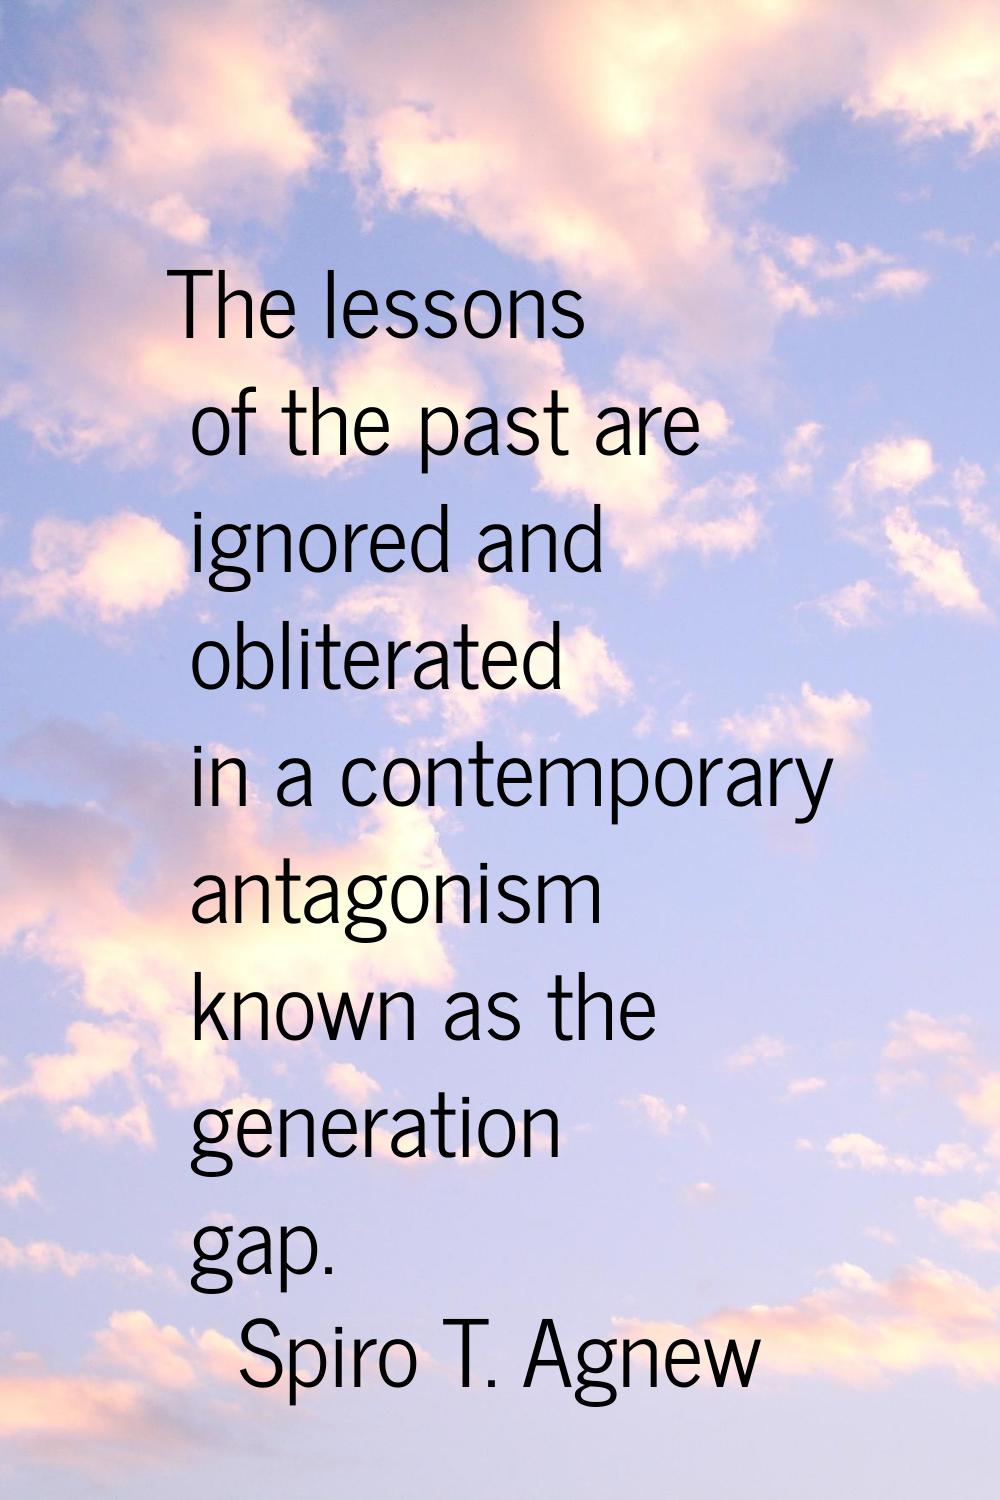 The lessons of the past are ignored and obliterated in a contemporary antagonism known as the gener